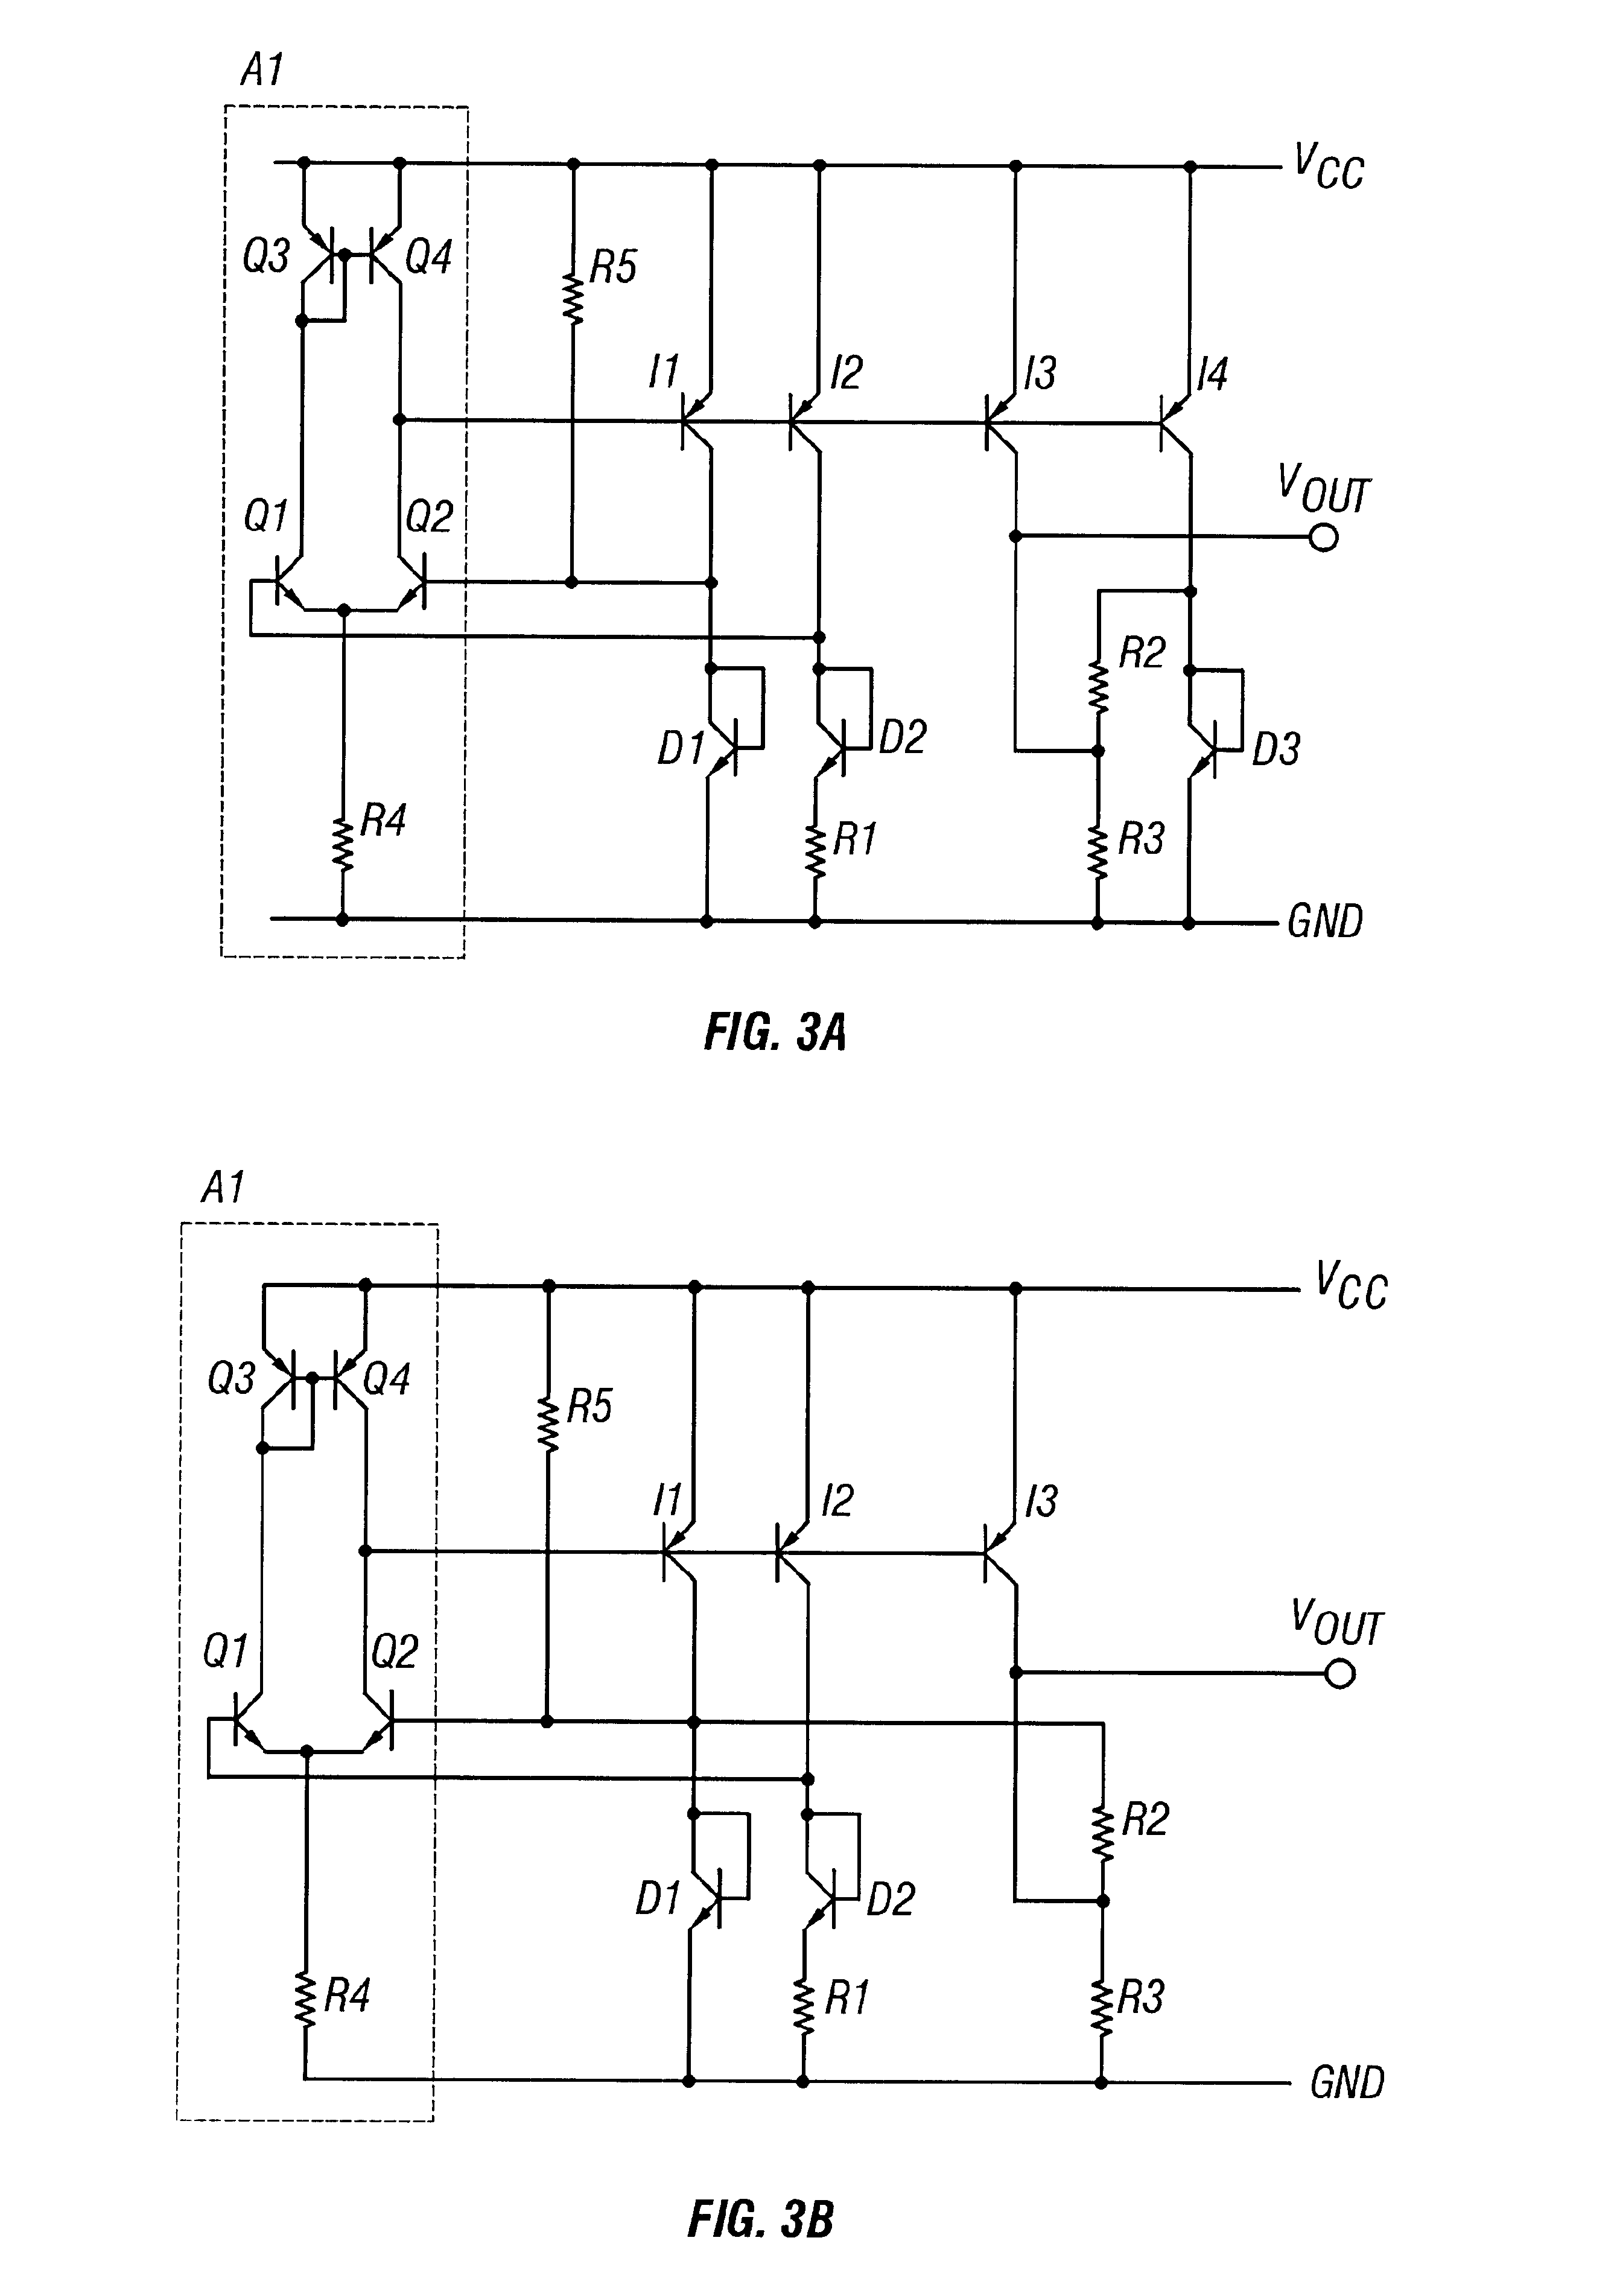 Regulated low-voltage generation circuit